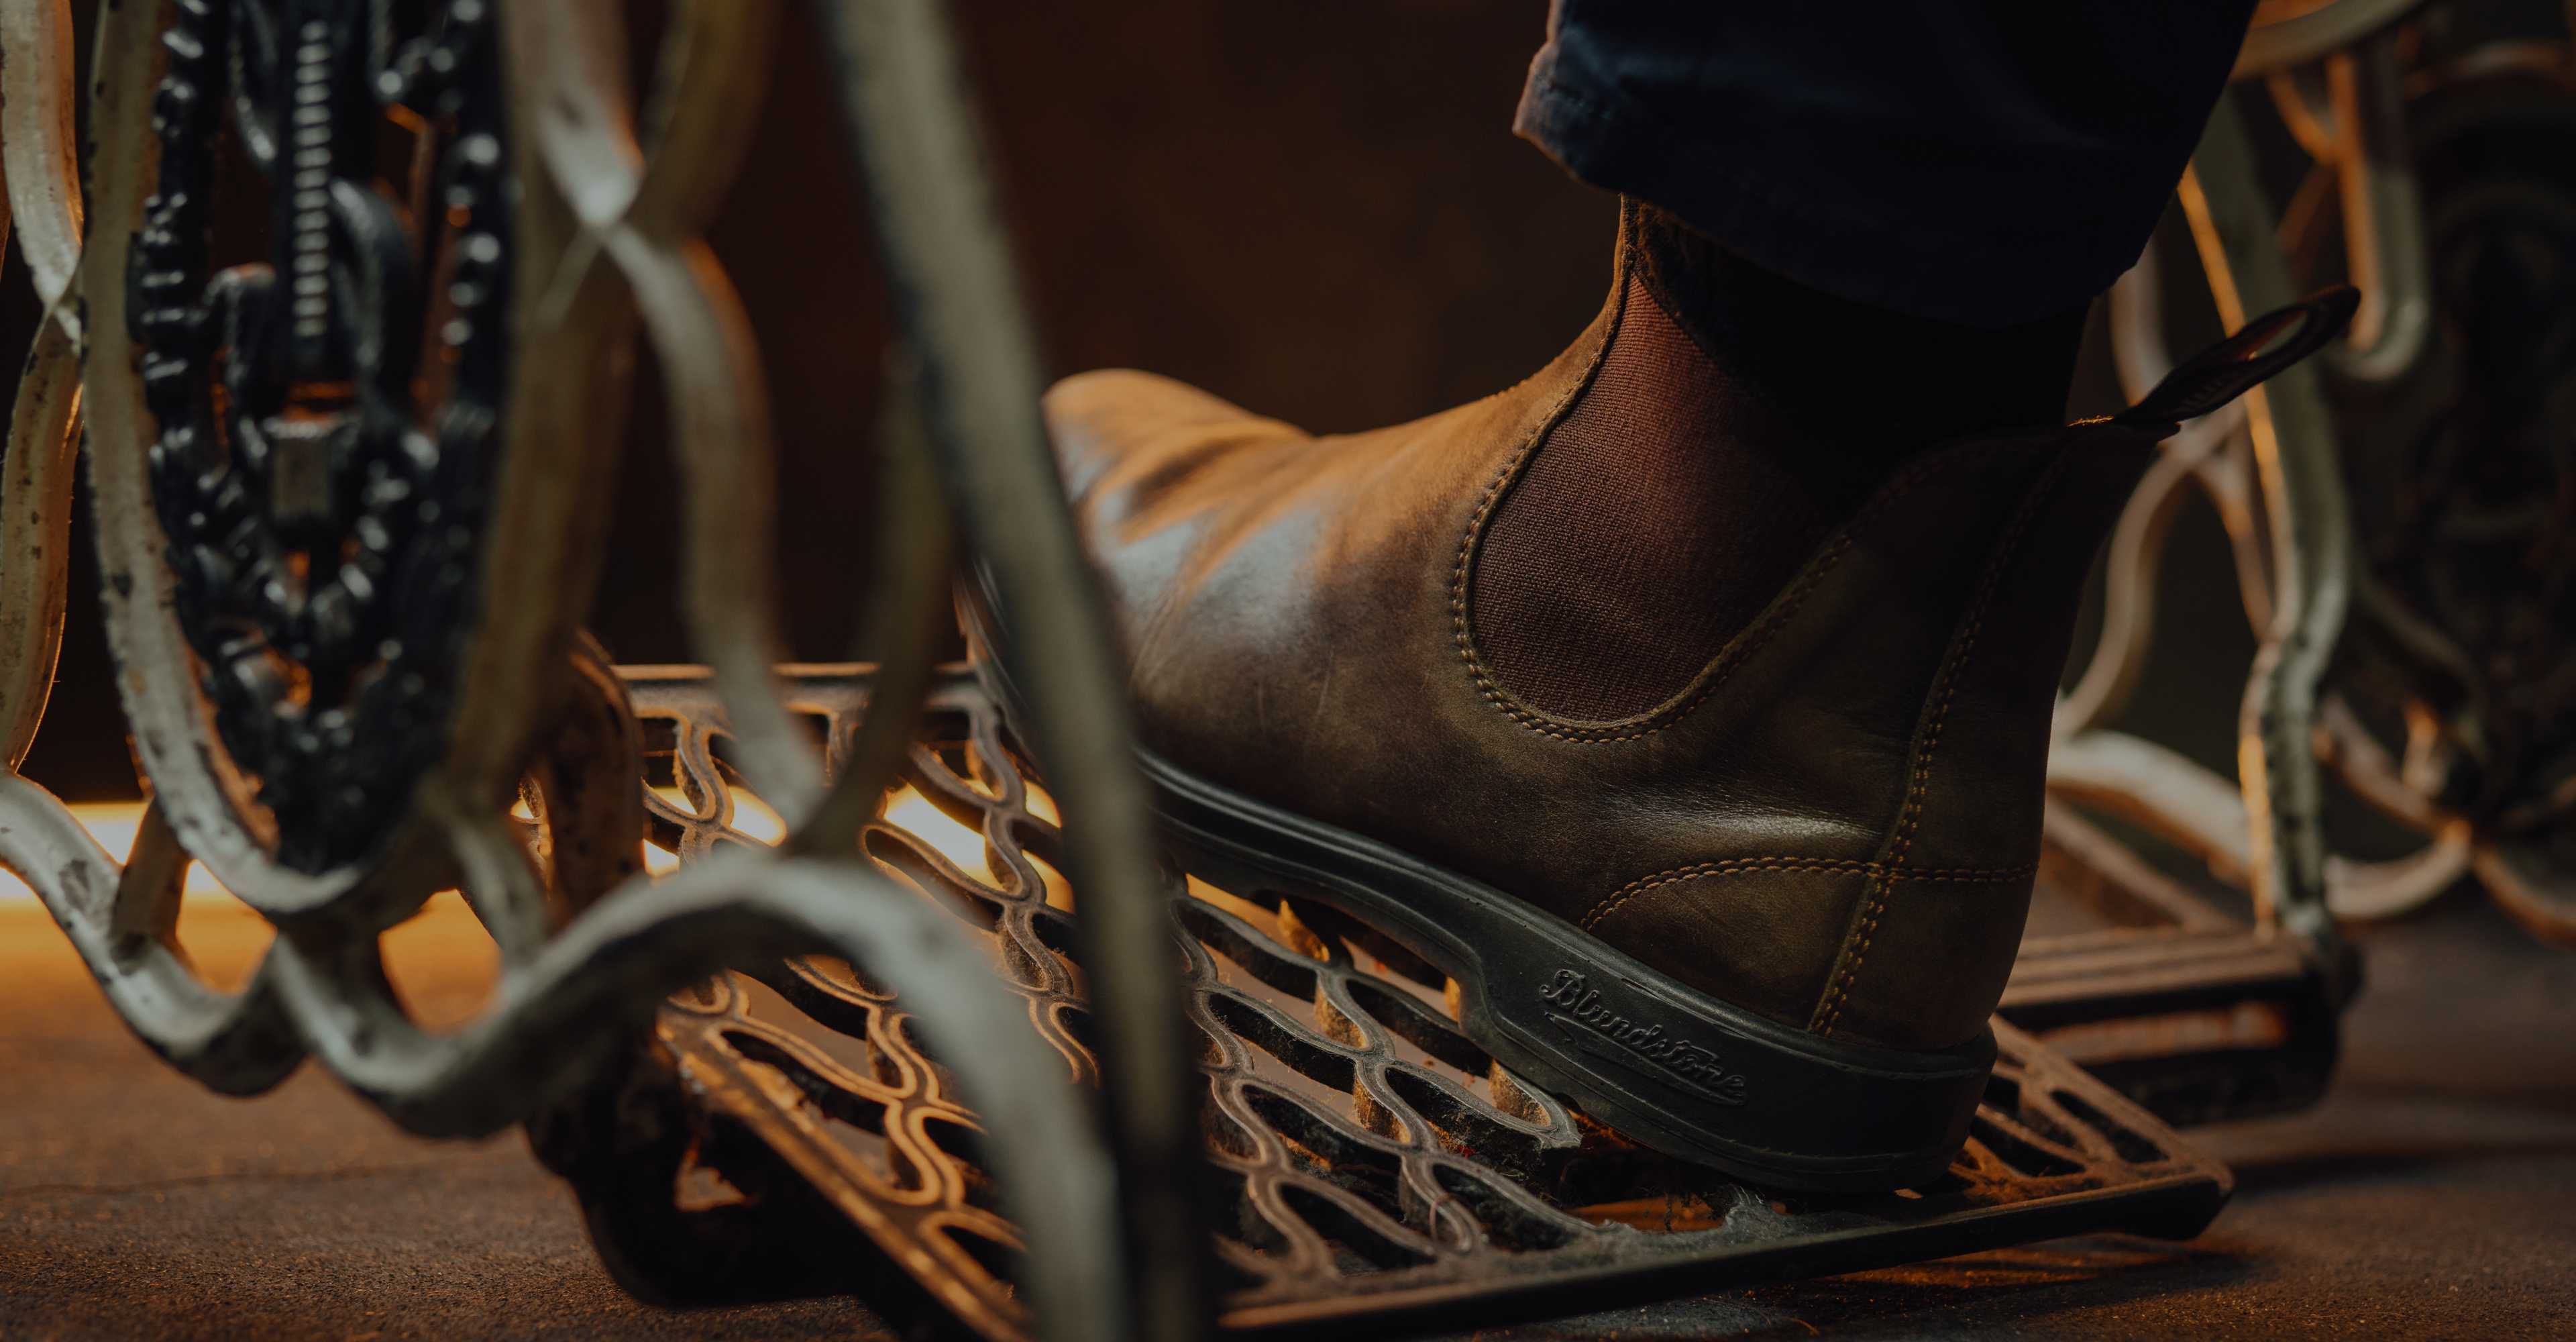 Helping an iconic brand Blundstone commemorate 150 years